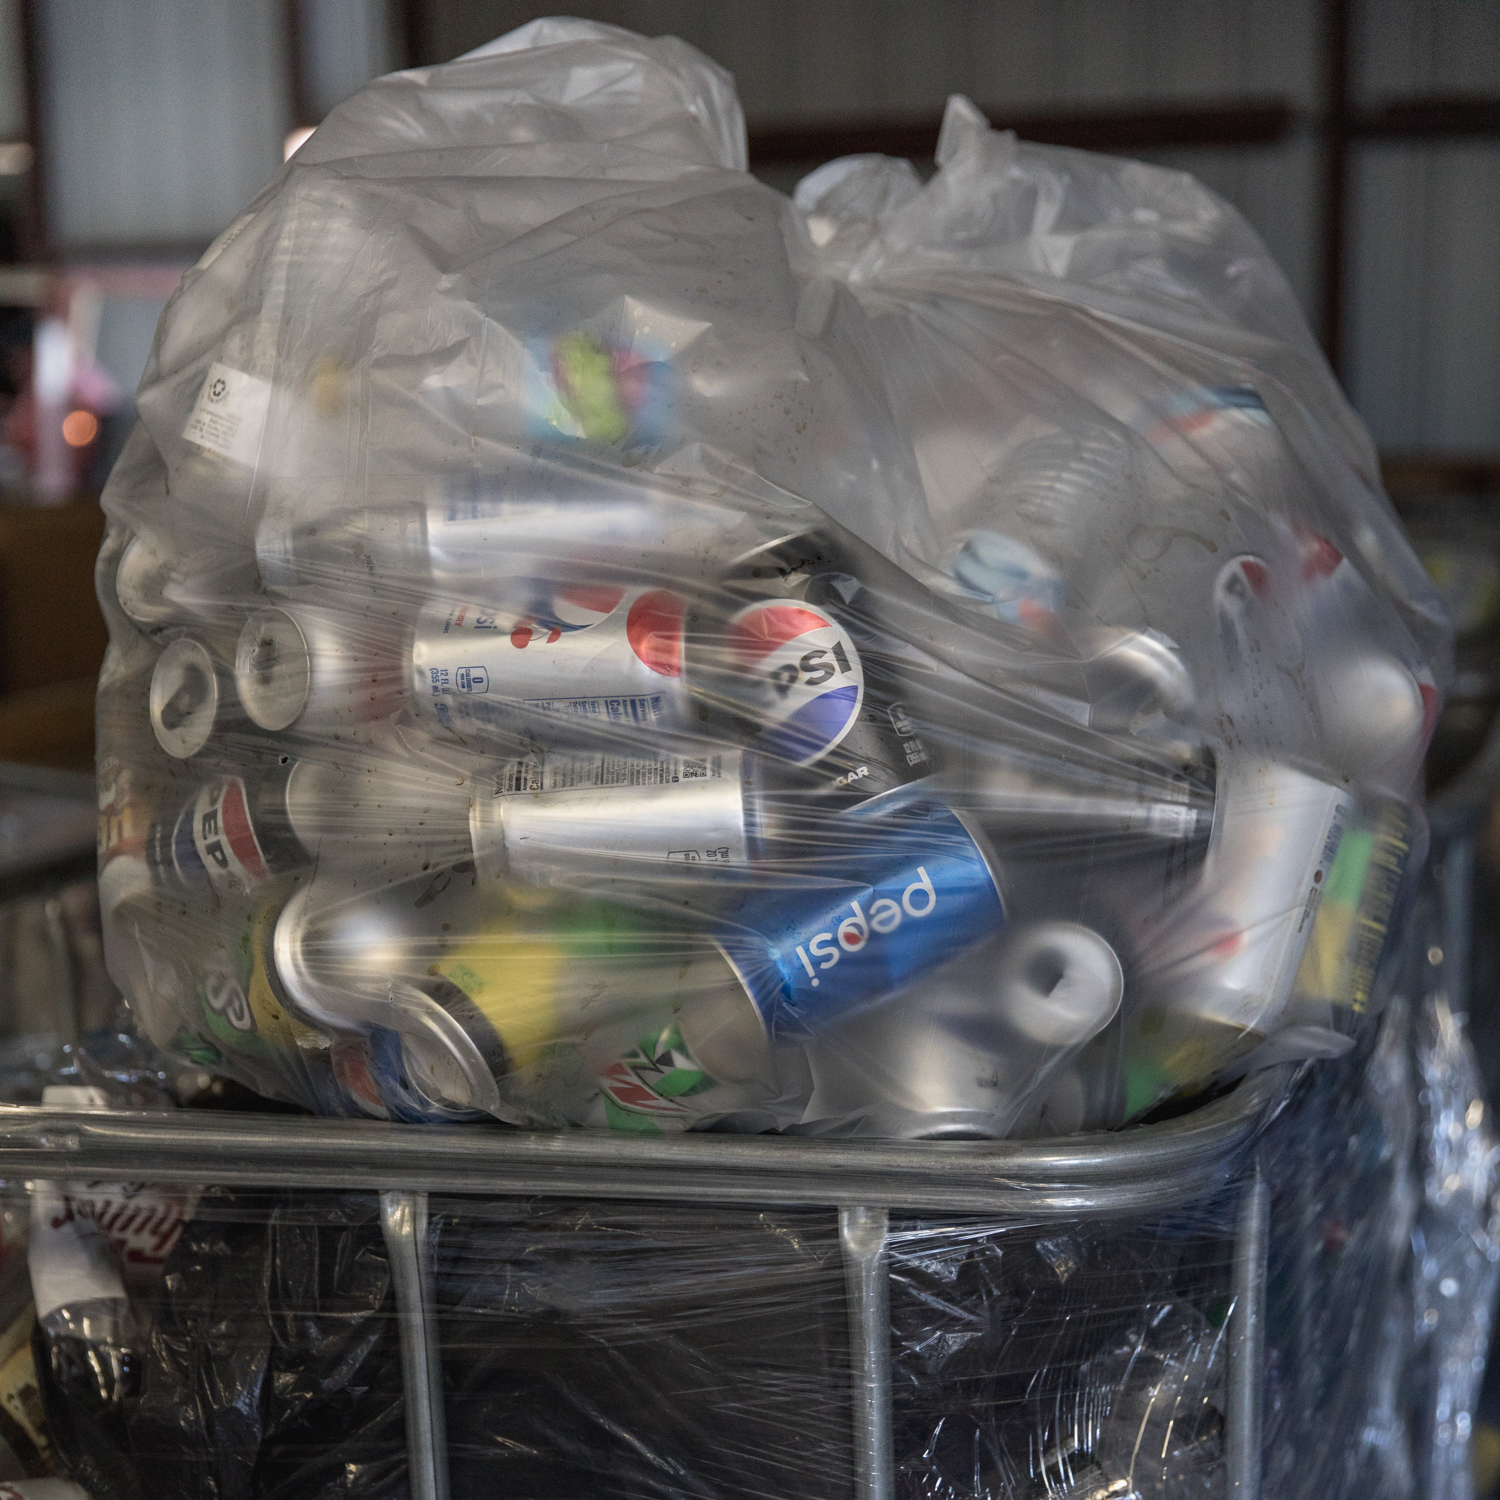 A bag of recycling sits on a pallet, waiting to be picked up by Marshall County Recycling Services. TVDSI provides sorting services for Marshall County Recycling.